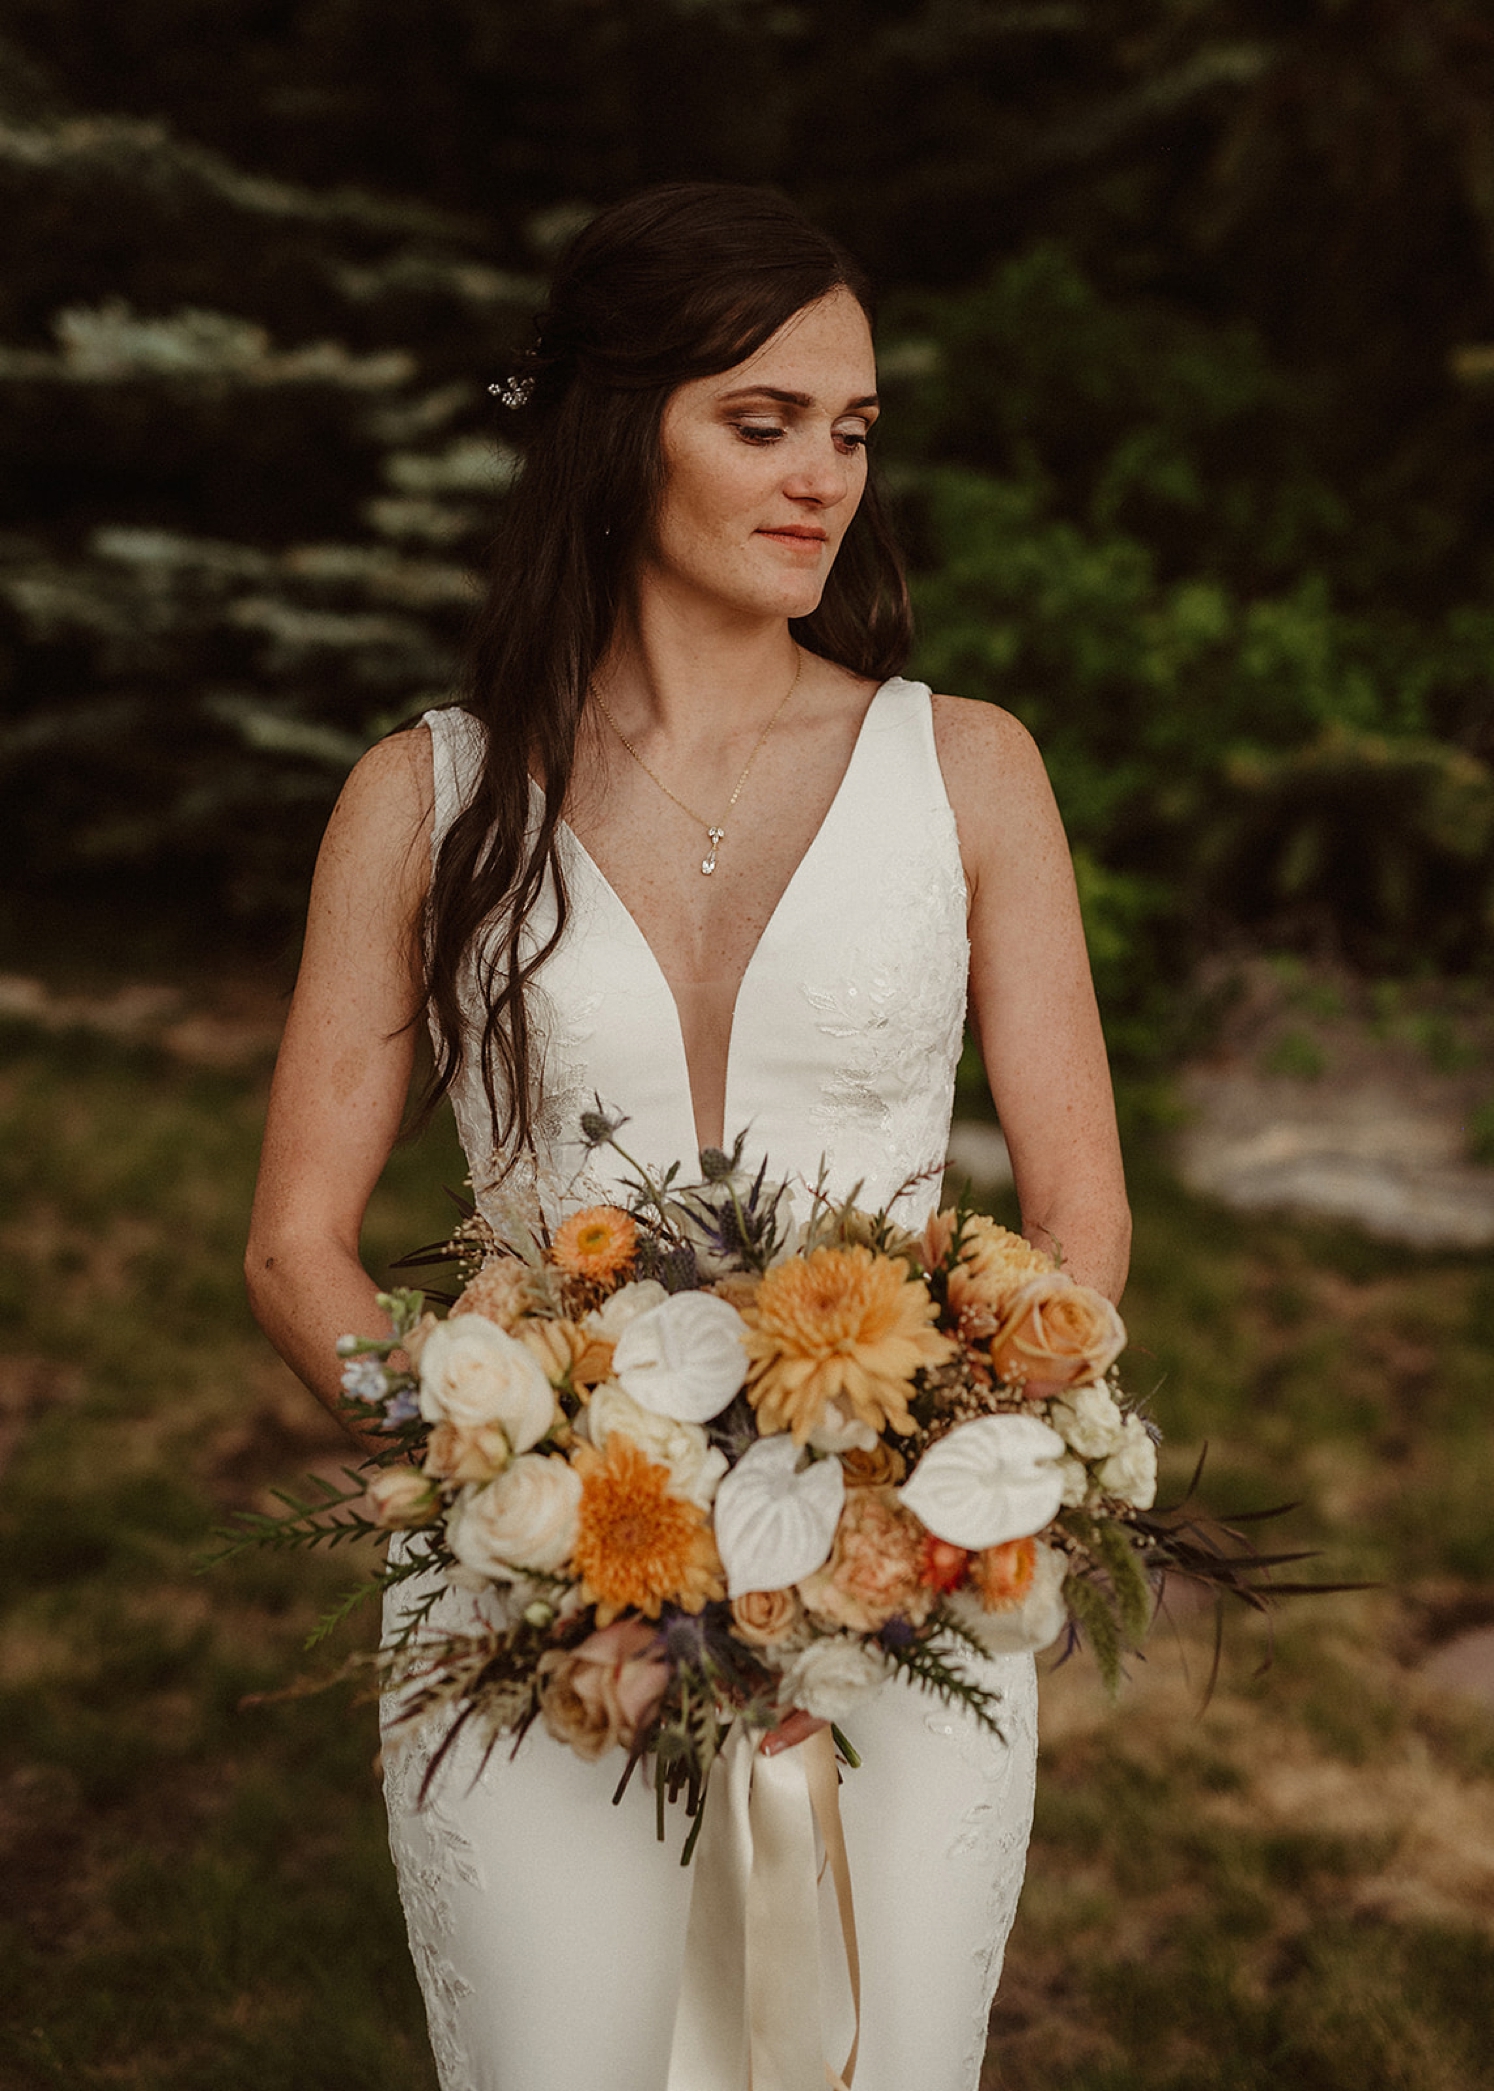 Partner holding bouquet filled with orange and white flowers looking down | McArthur Weddings and Events